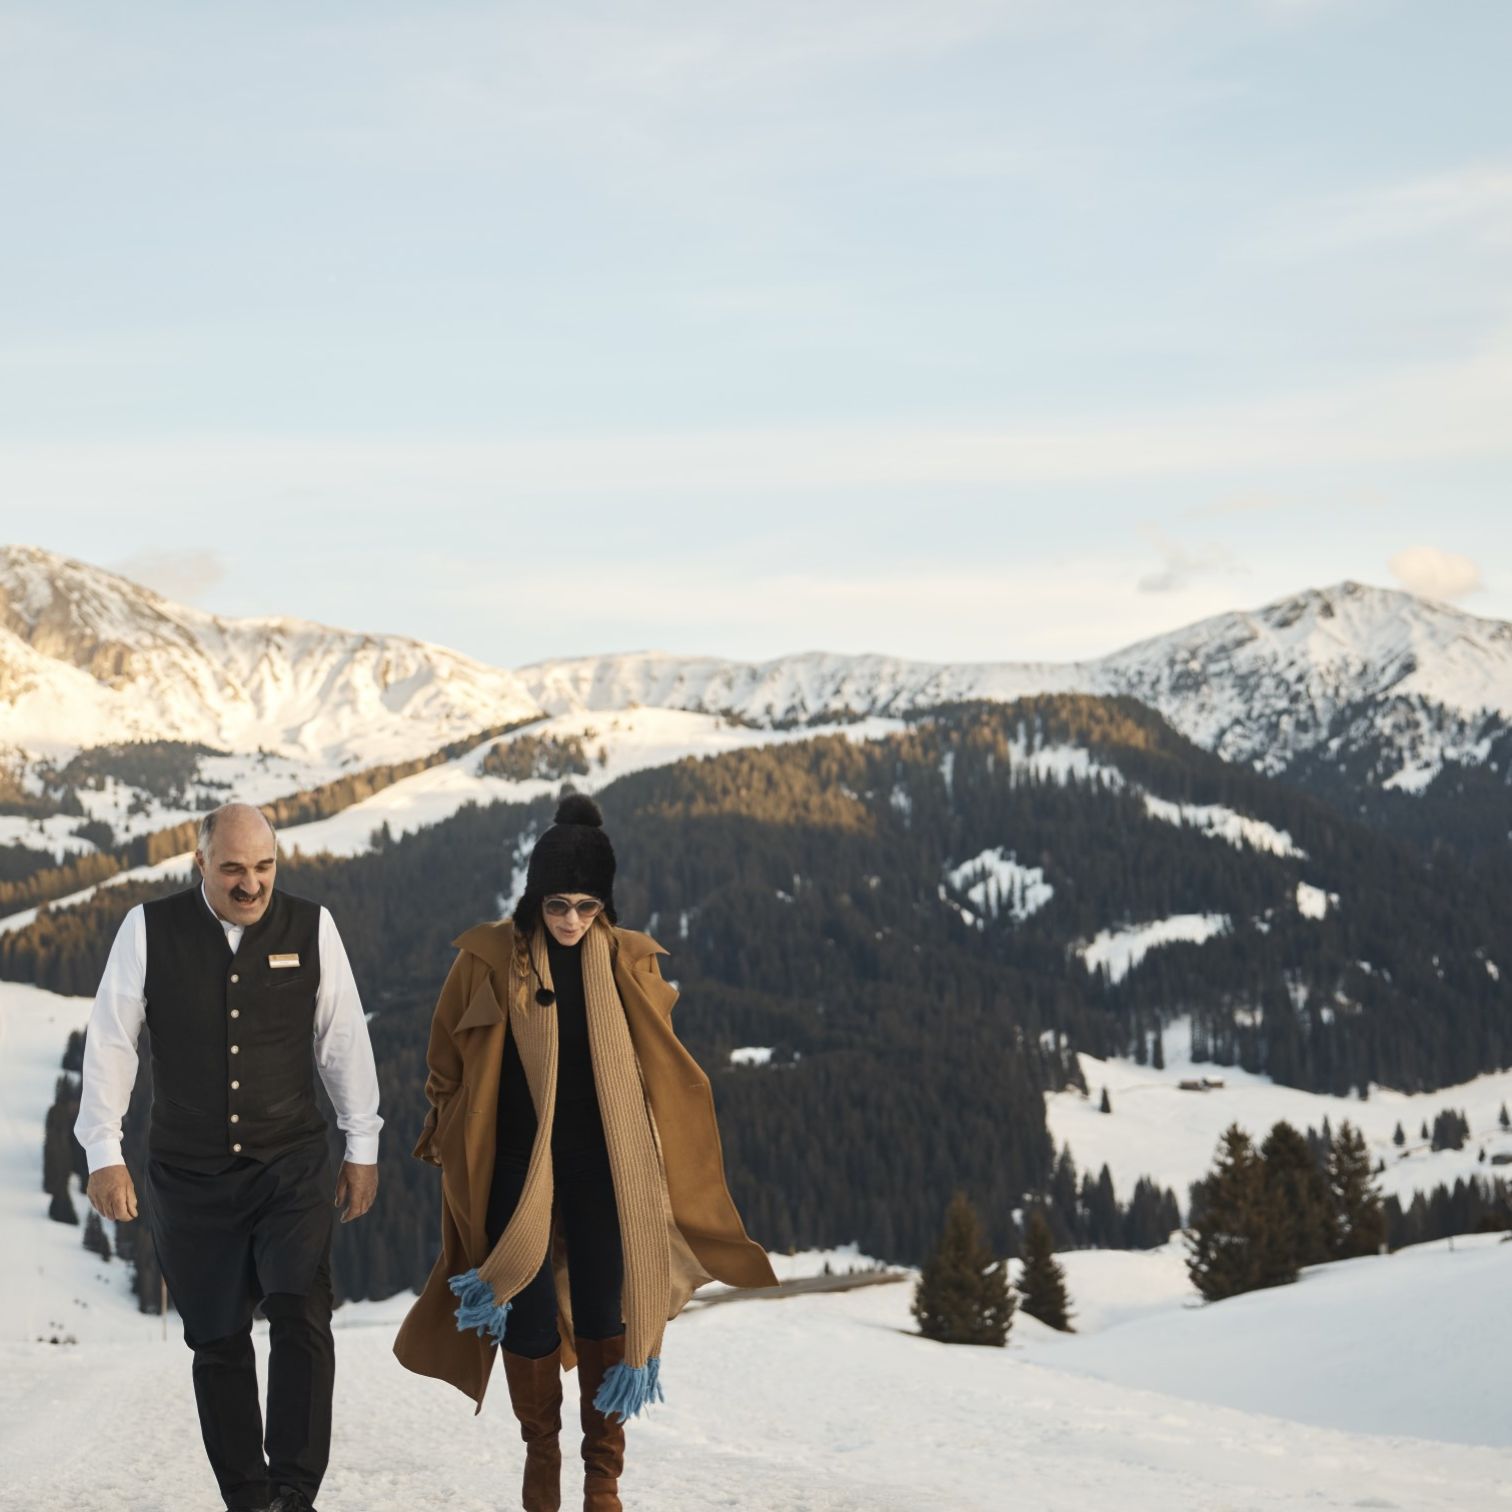 A Man And Woman Standing On A Snowy Mountain